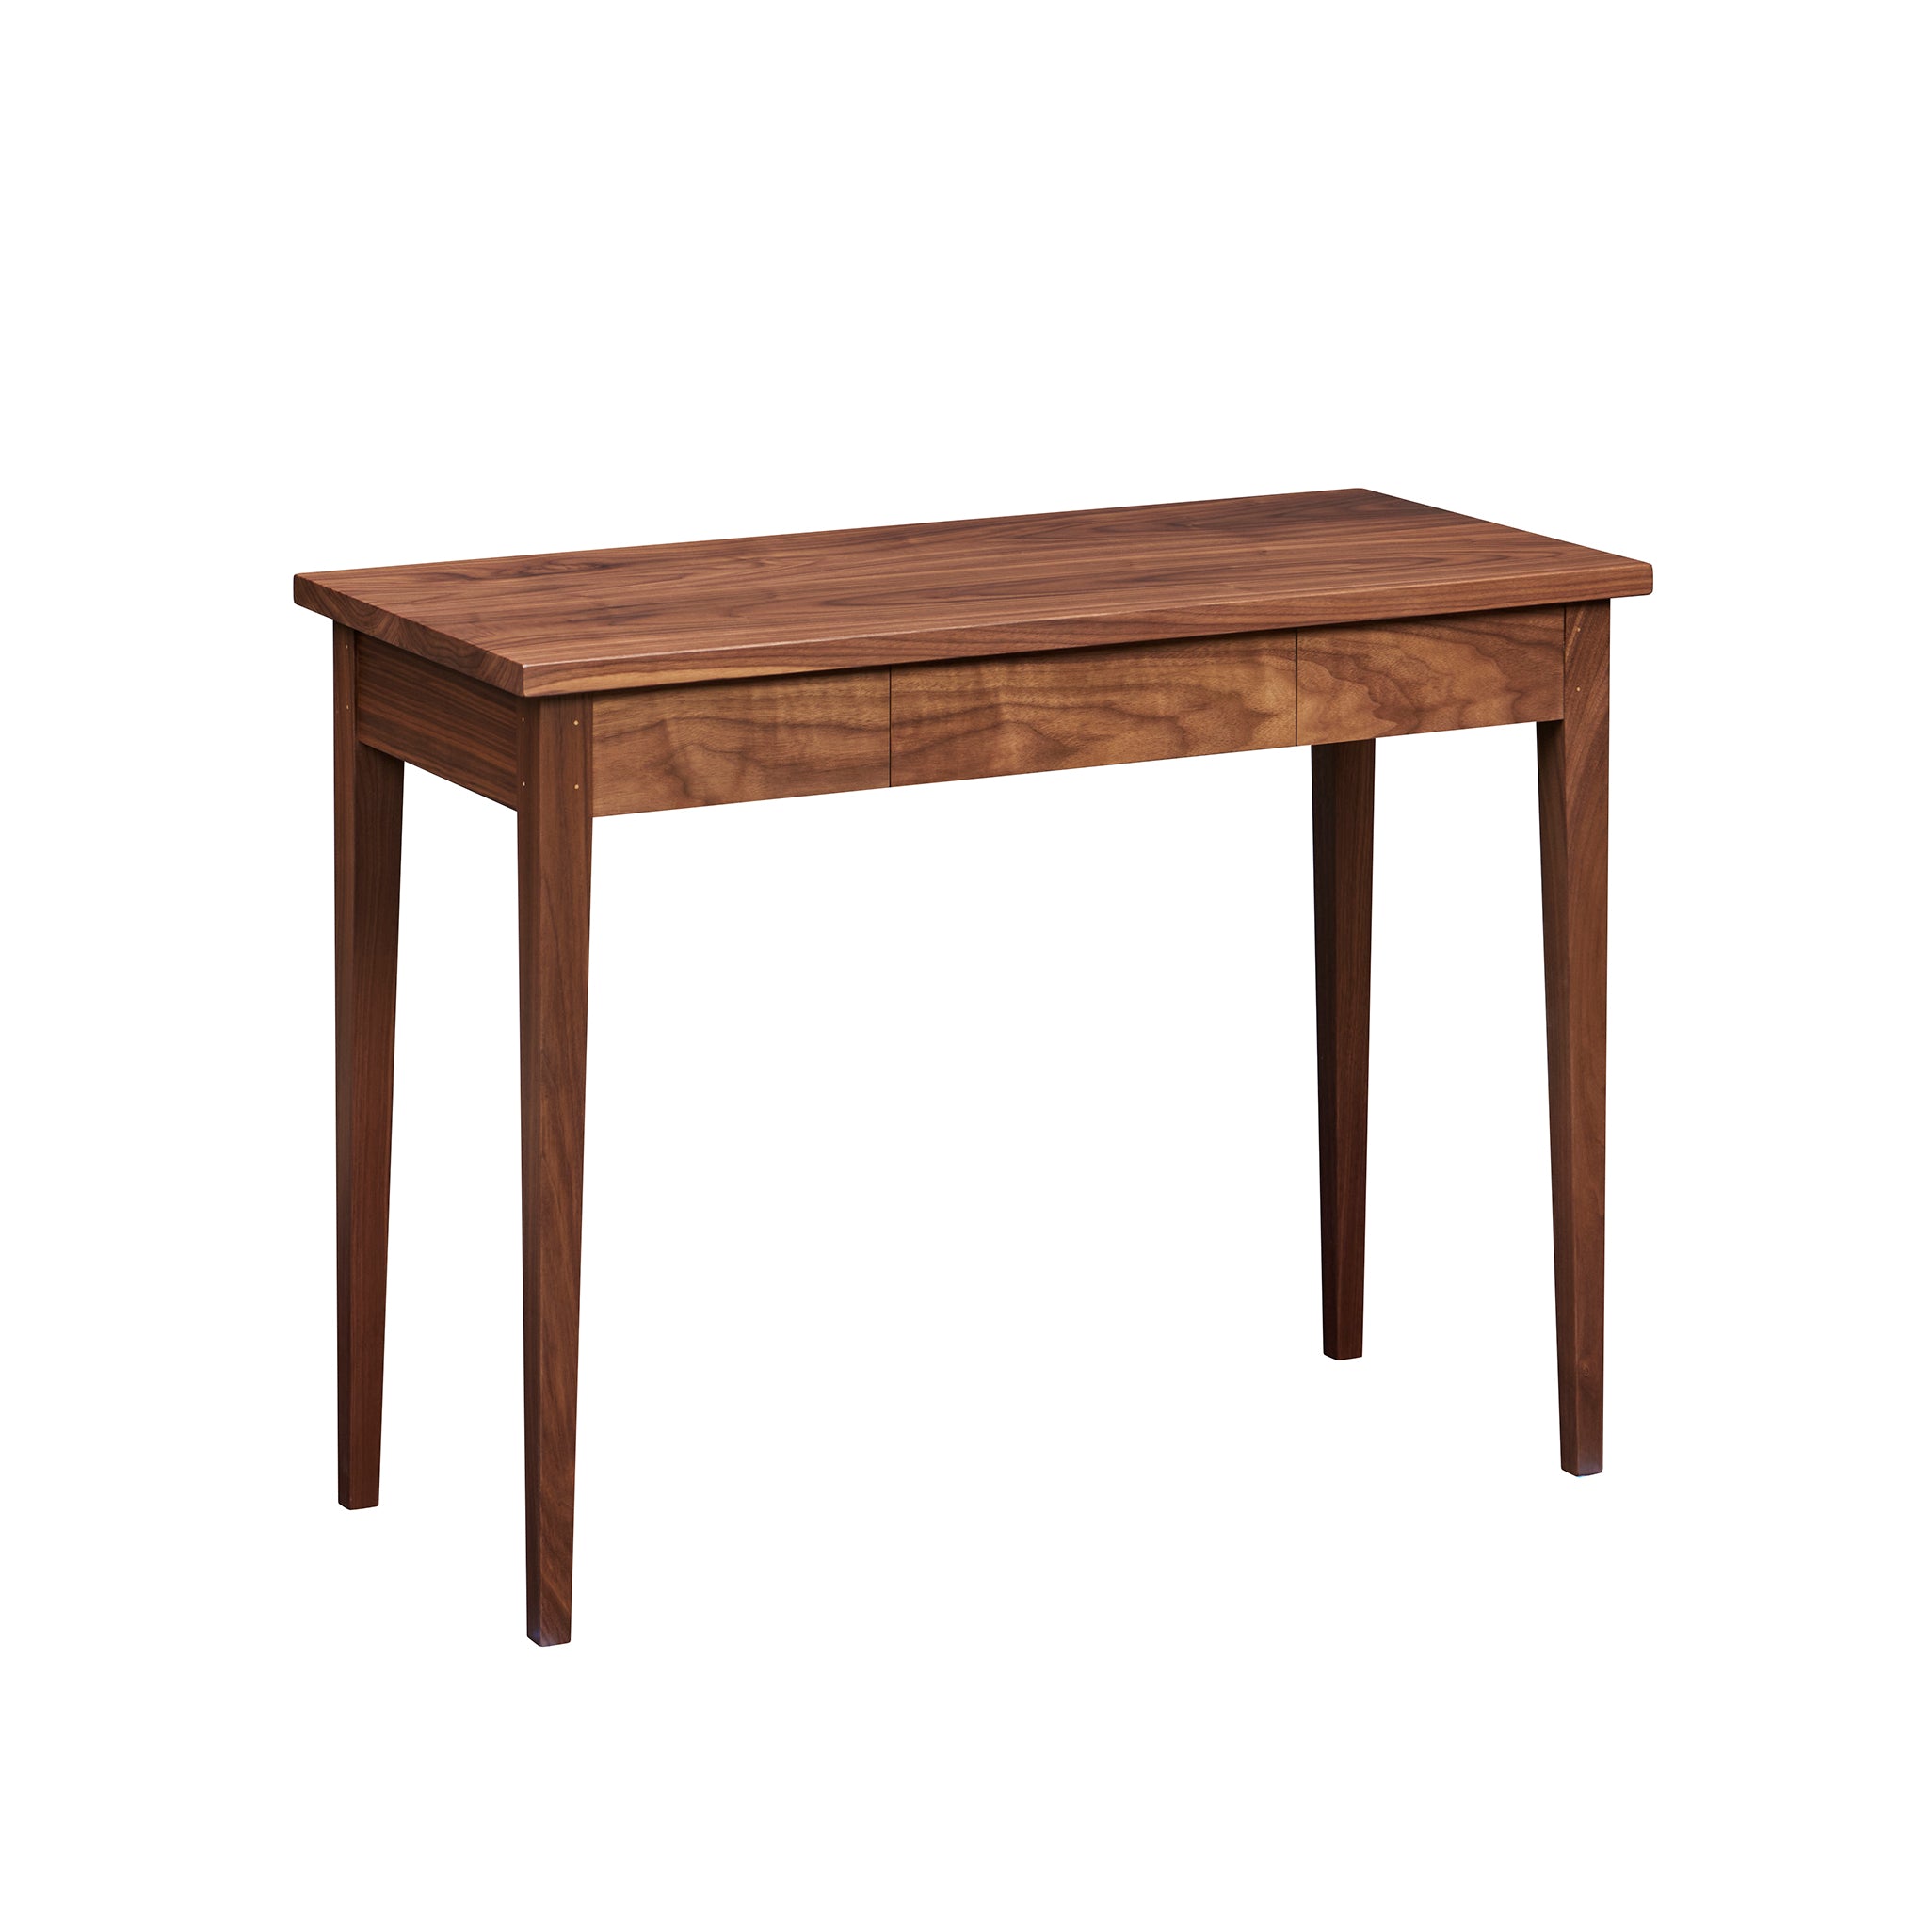 Shaker Heirloom Console Table with a drawer in walnut